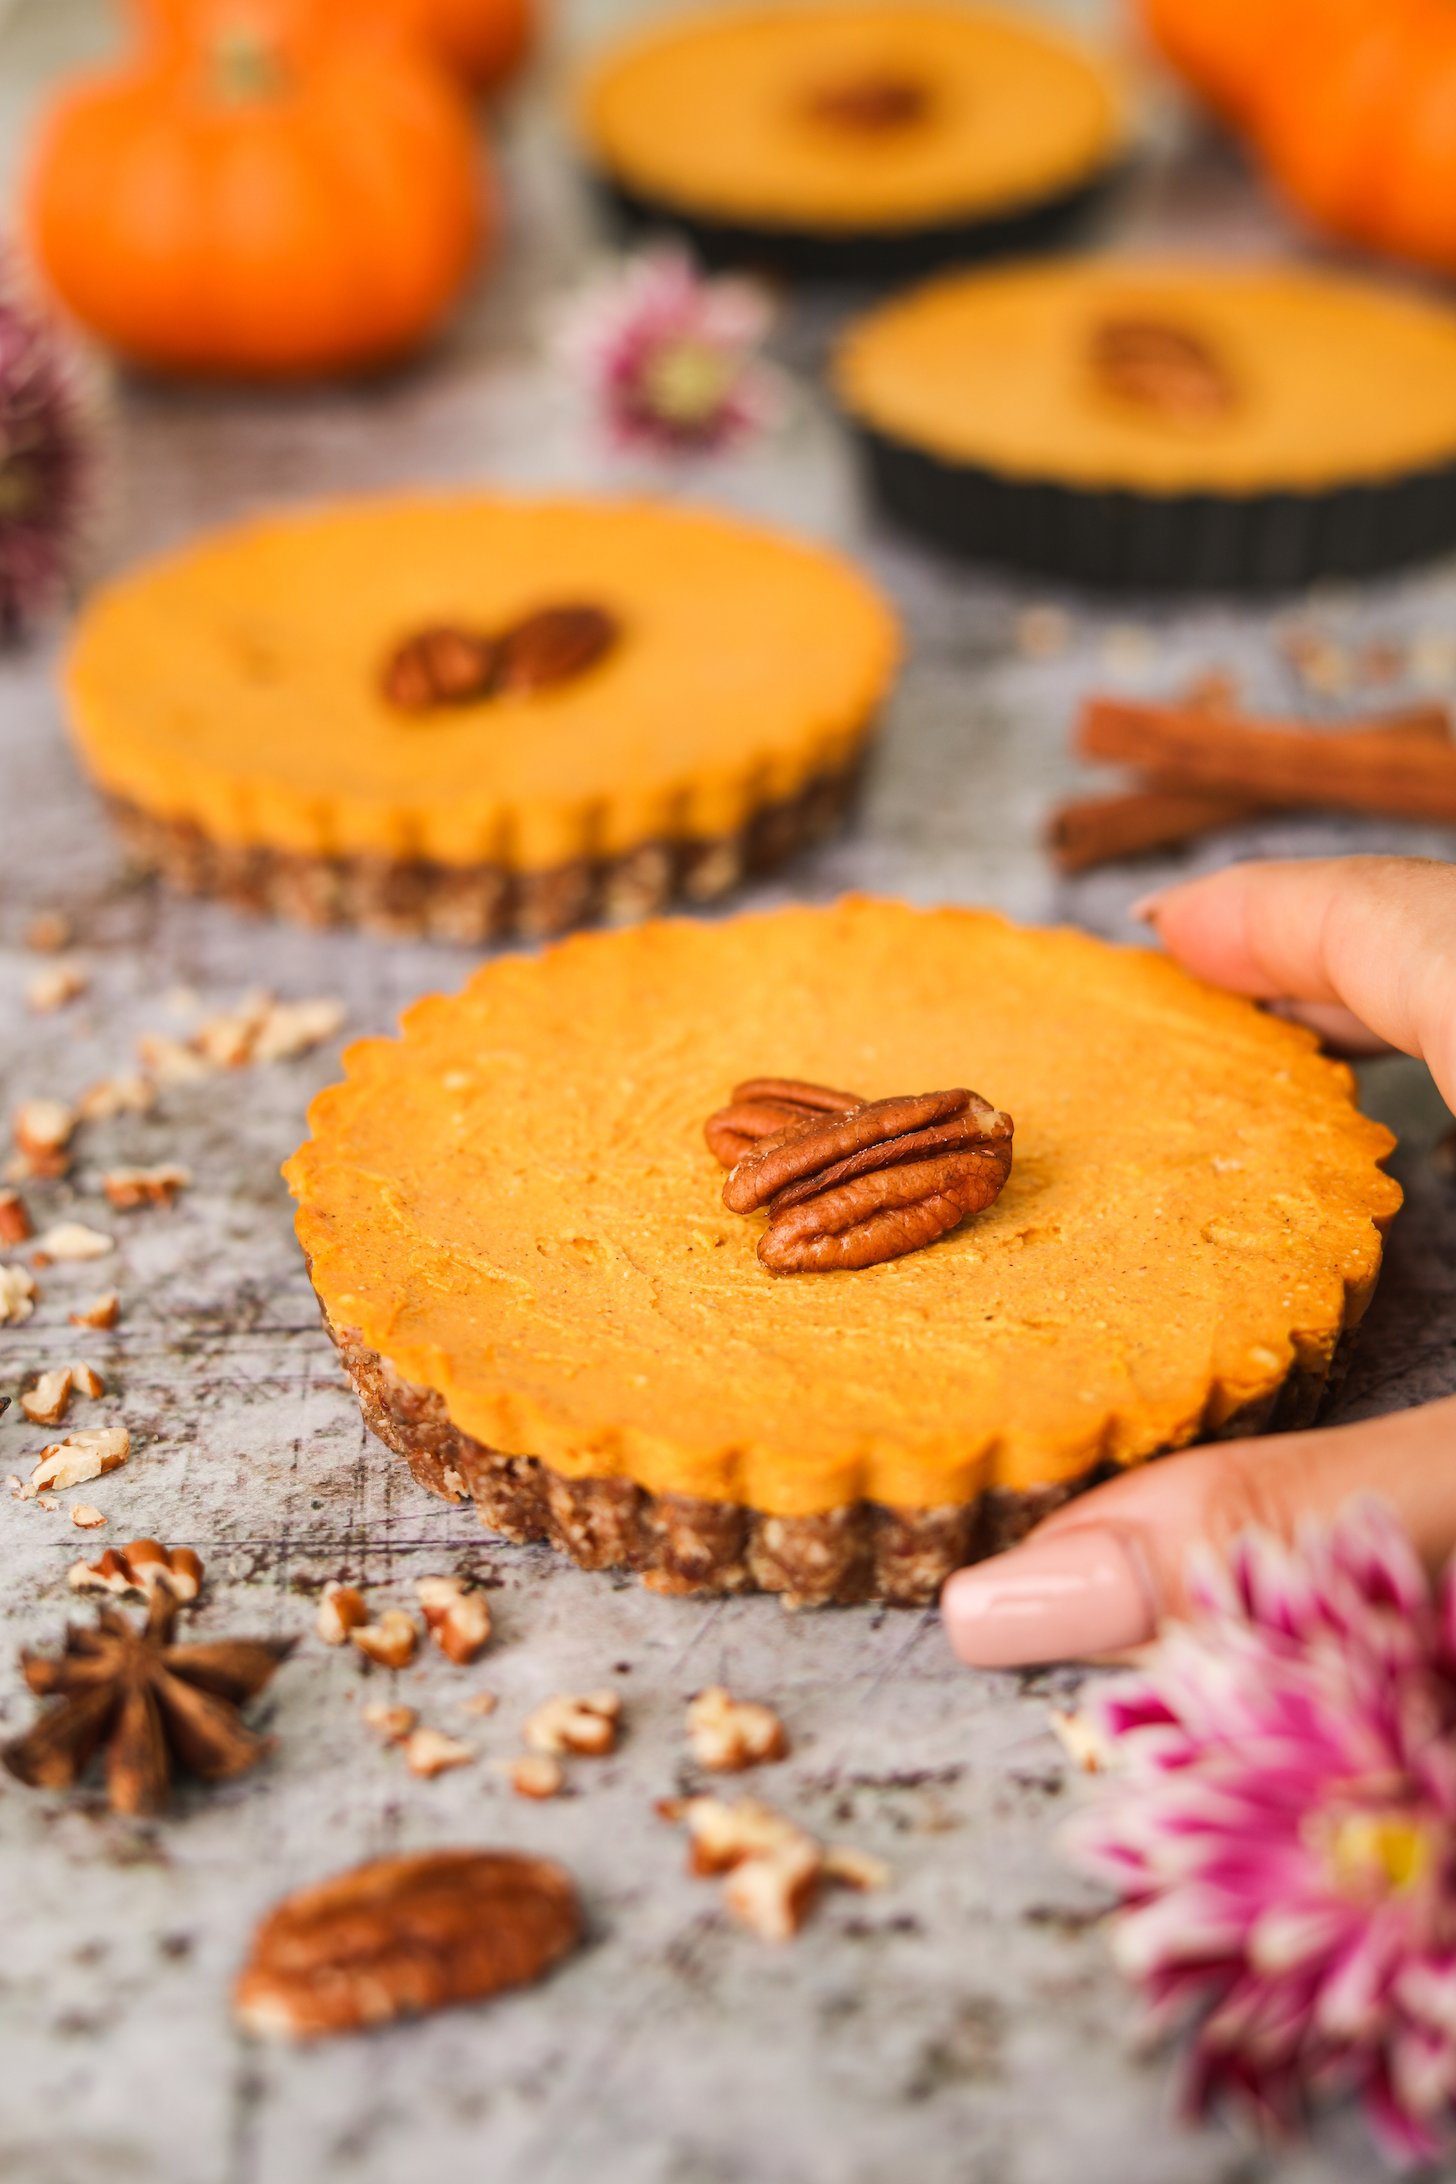 Perspective image of four mini pumpkin pies, with a hand reaching towards the one in the front.